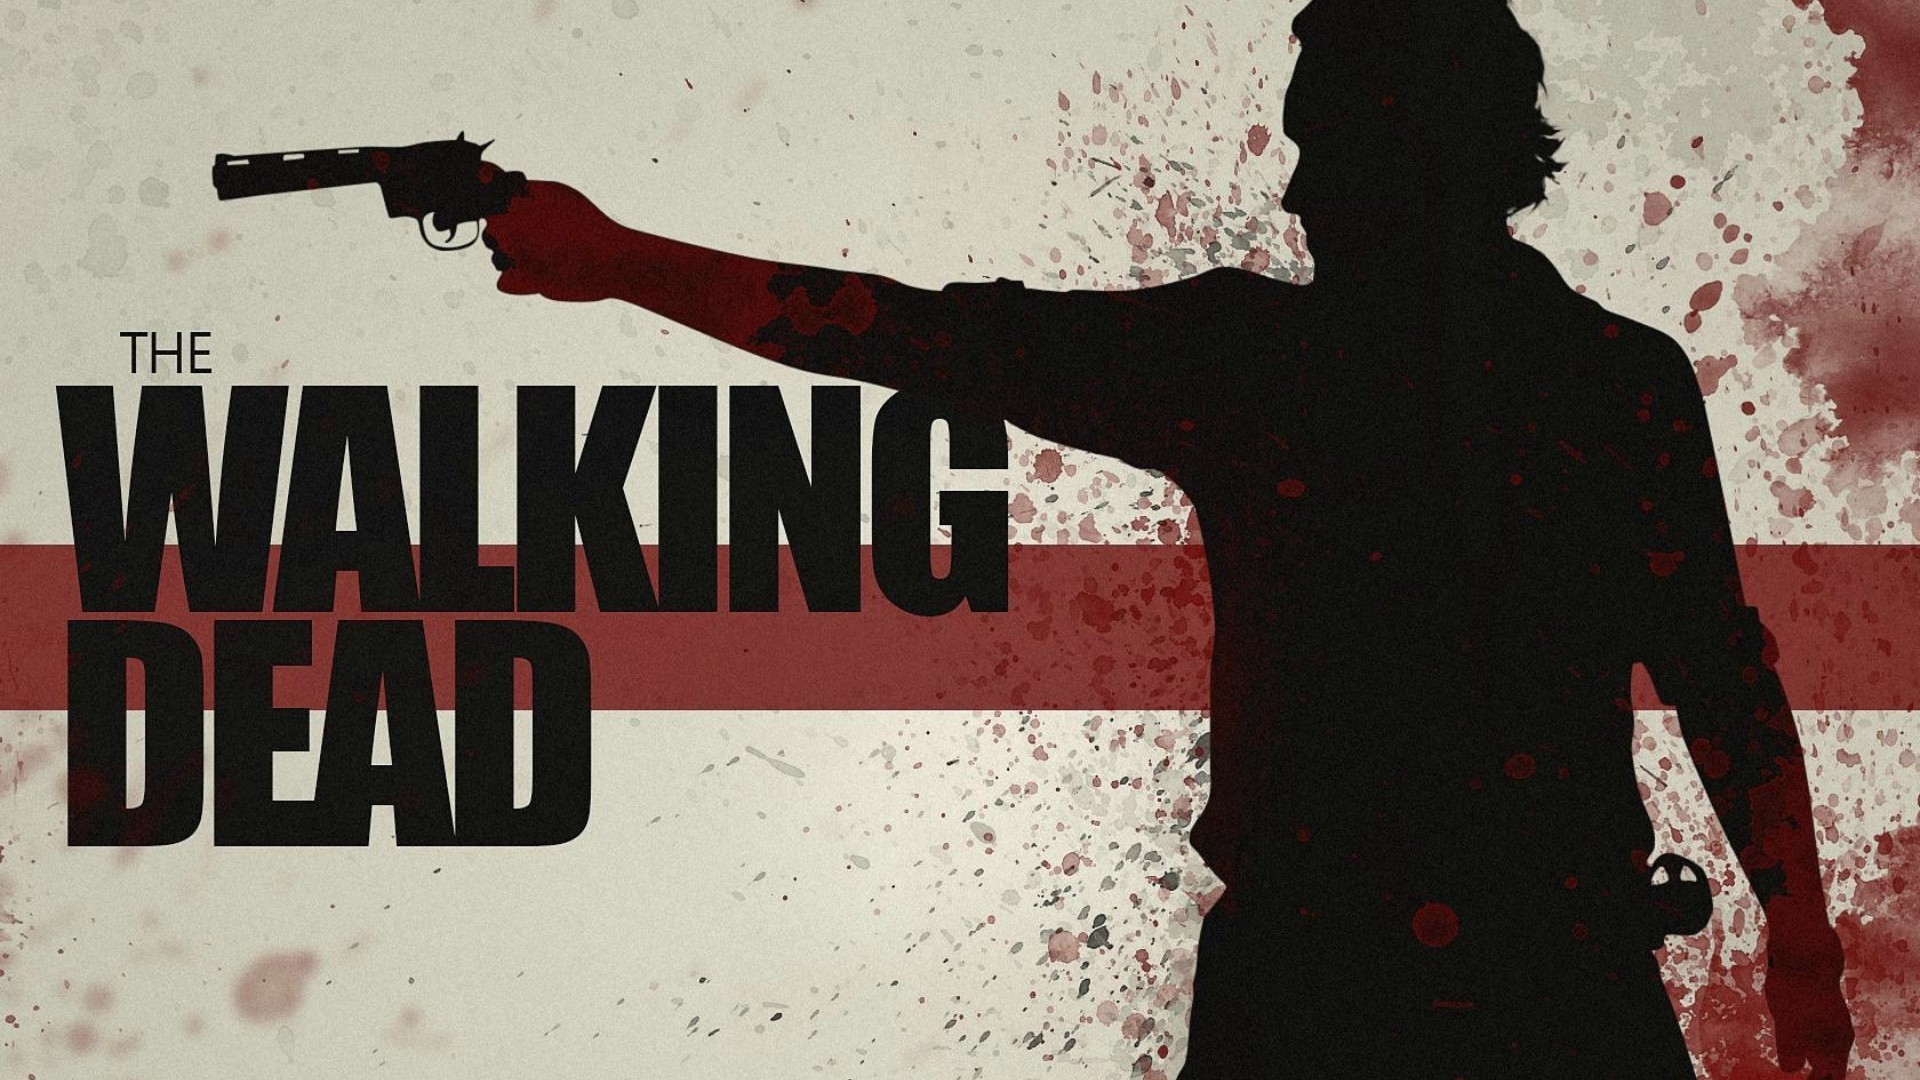 The walking dead Rick grimes Andrew lincoln Rick grimes Andrew lincoln Blood sprays Drops Vector